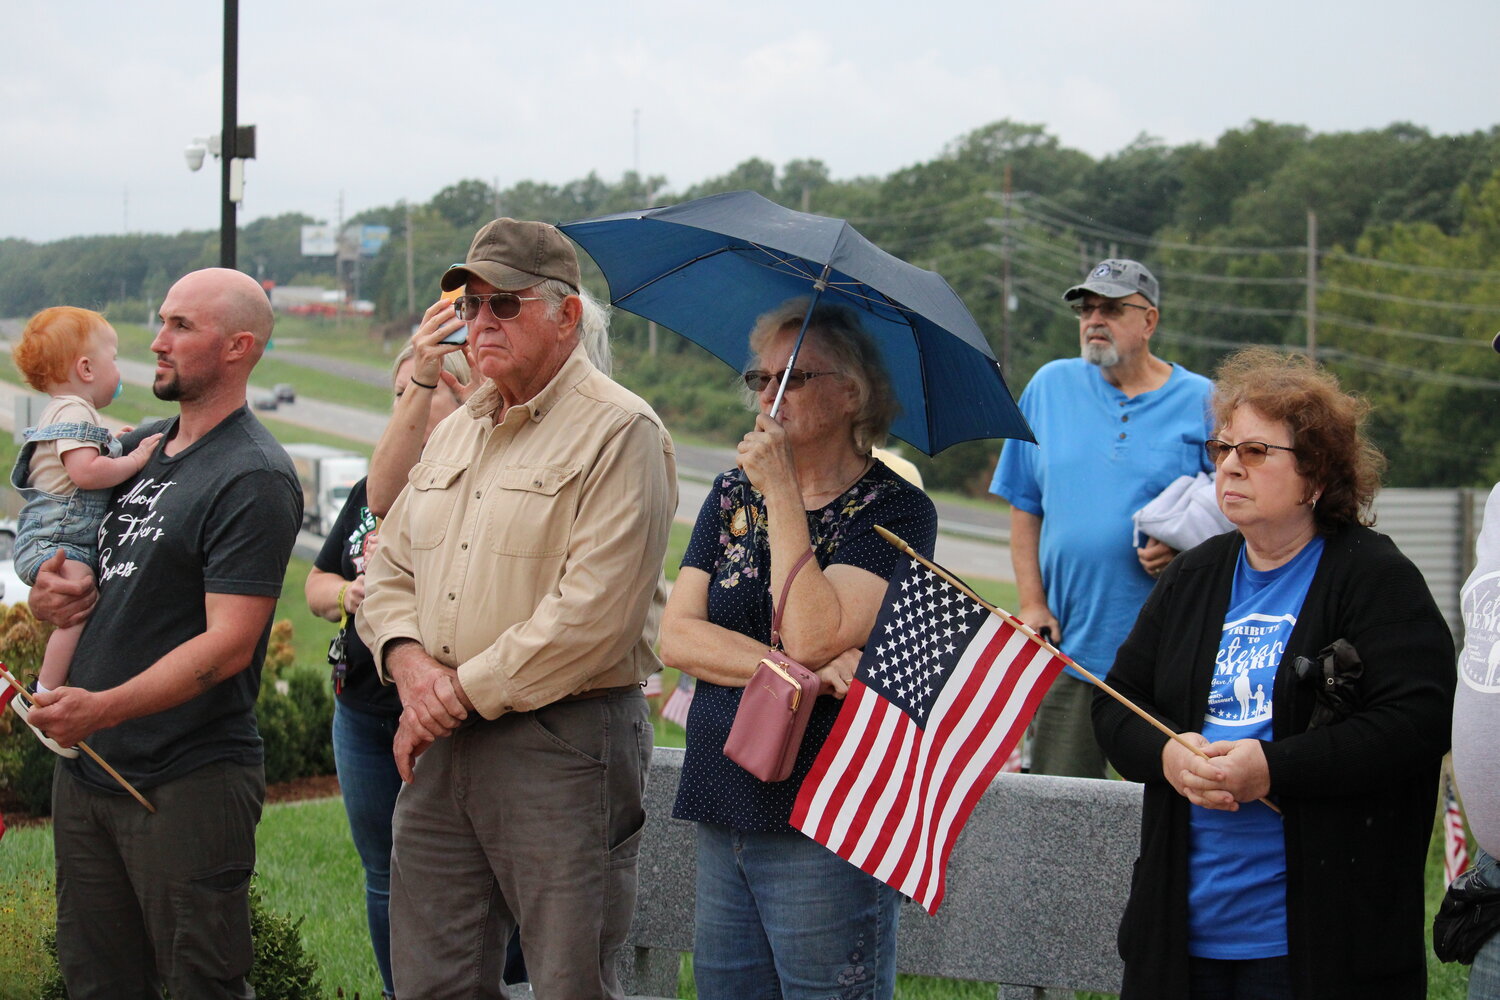 Members of the crowd listen during the Sept. 11 ceremony.